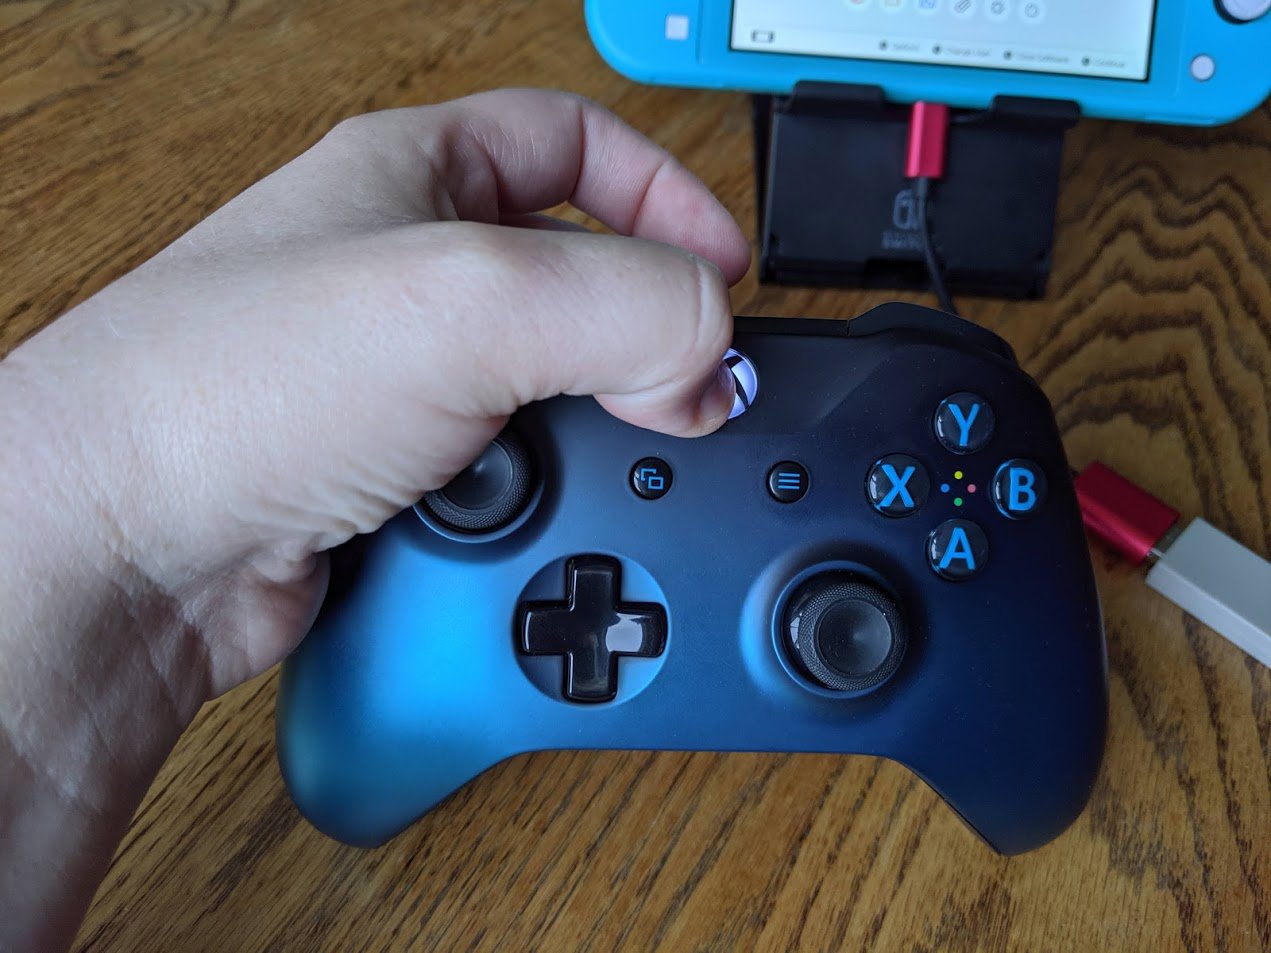 Hold down Home Button on Xbox One controller